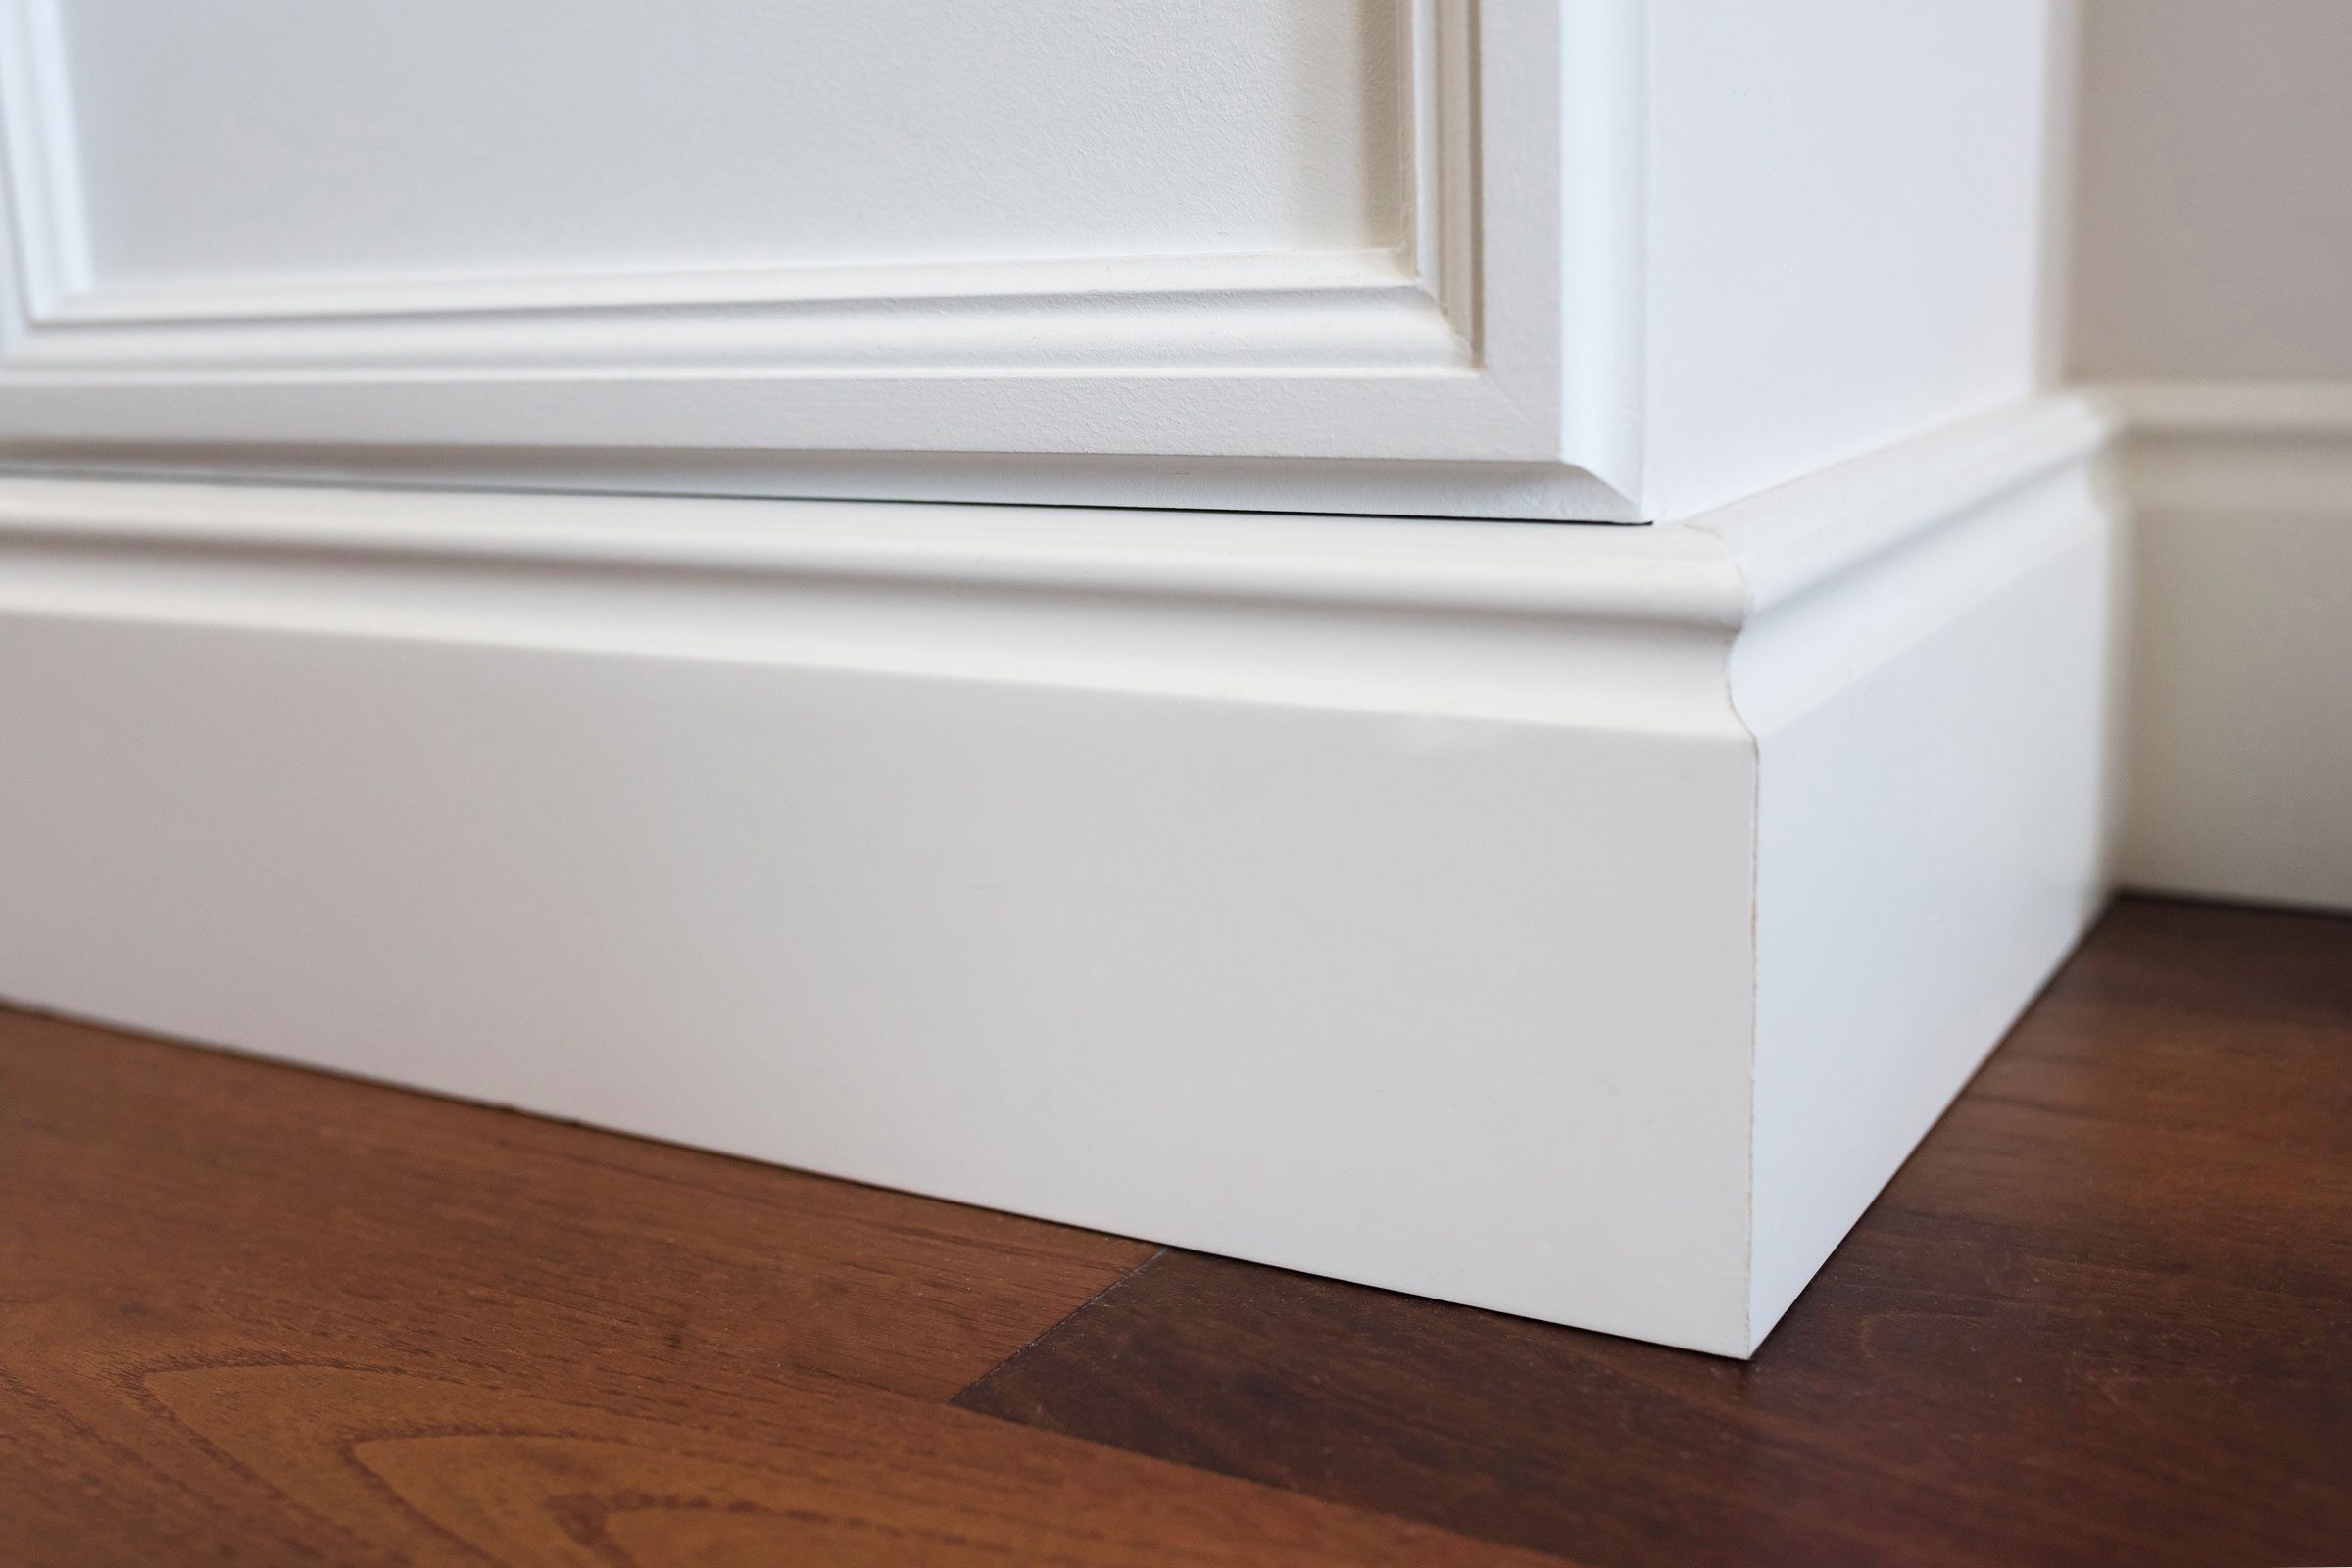 baseboards #housecleaning #housecleaningtips #cleaningtips #cleanin, Cleaning Walls In House